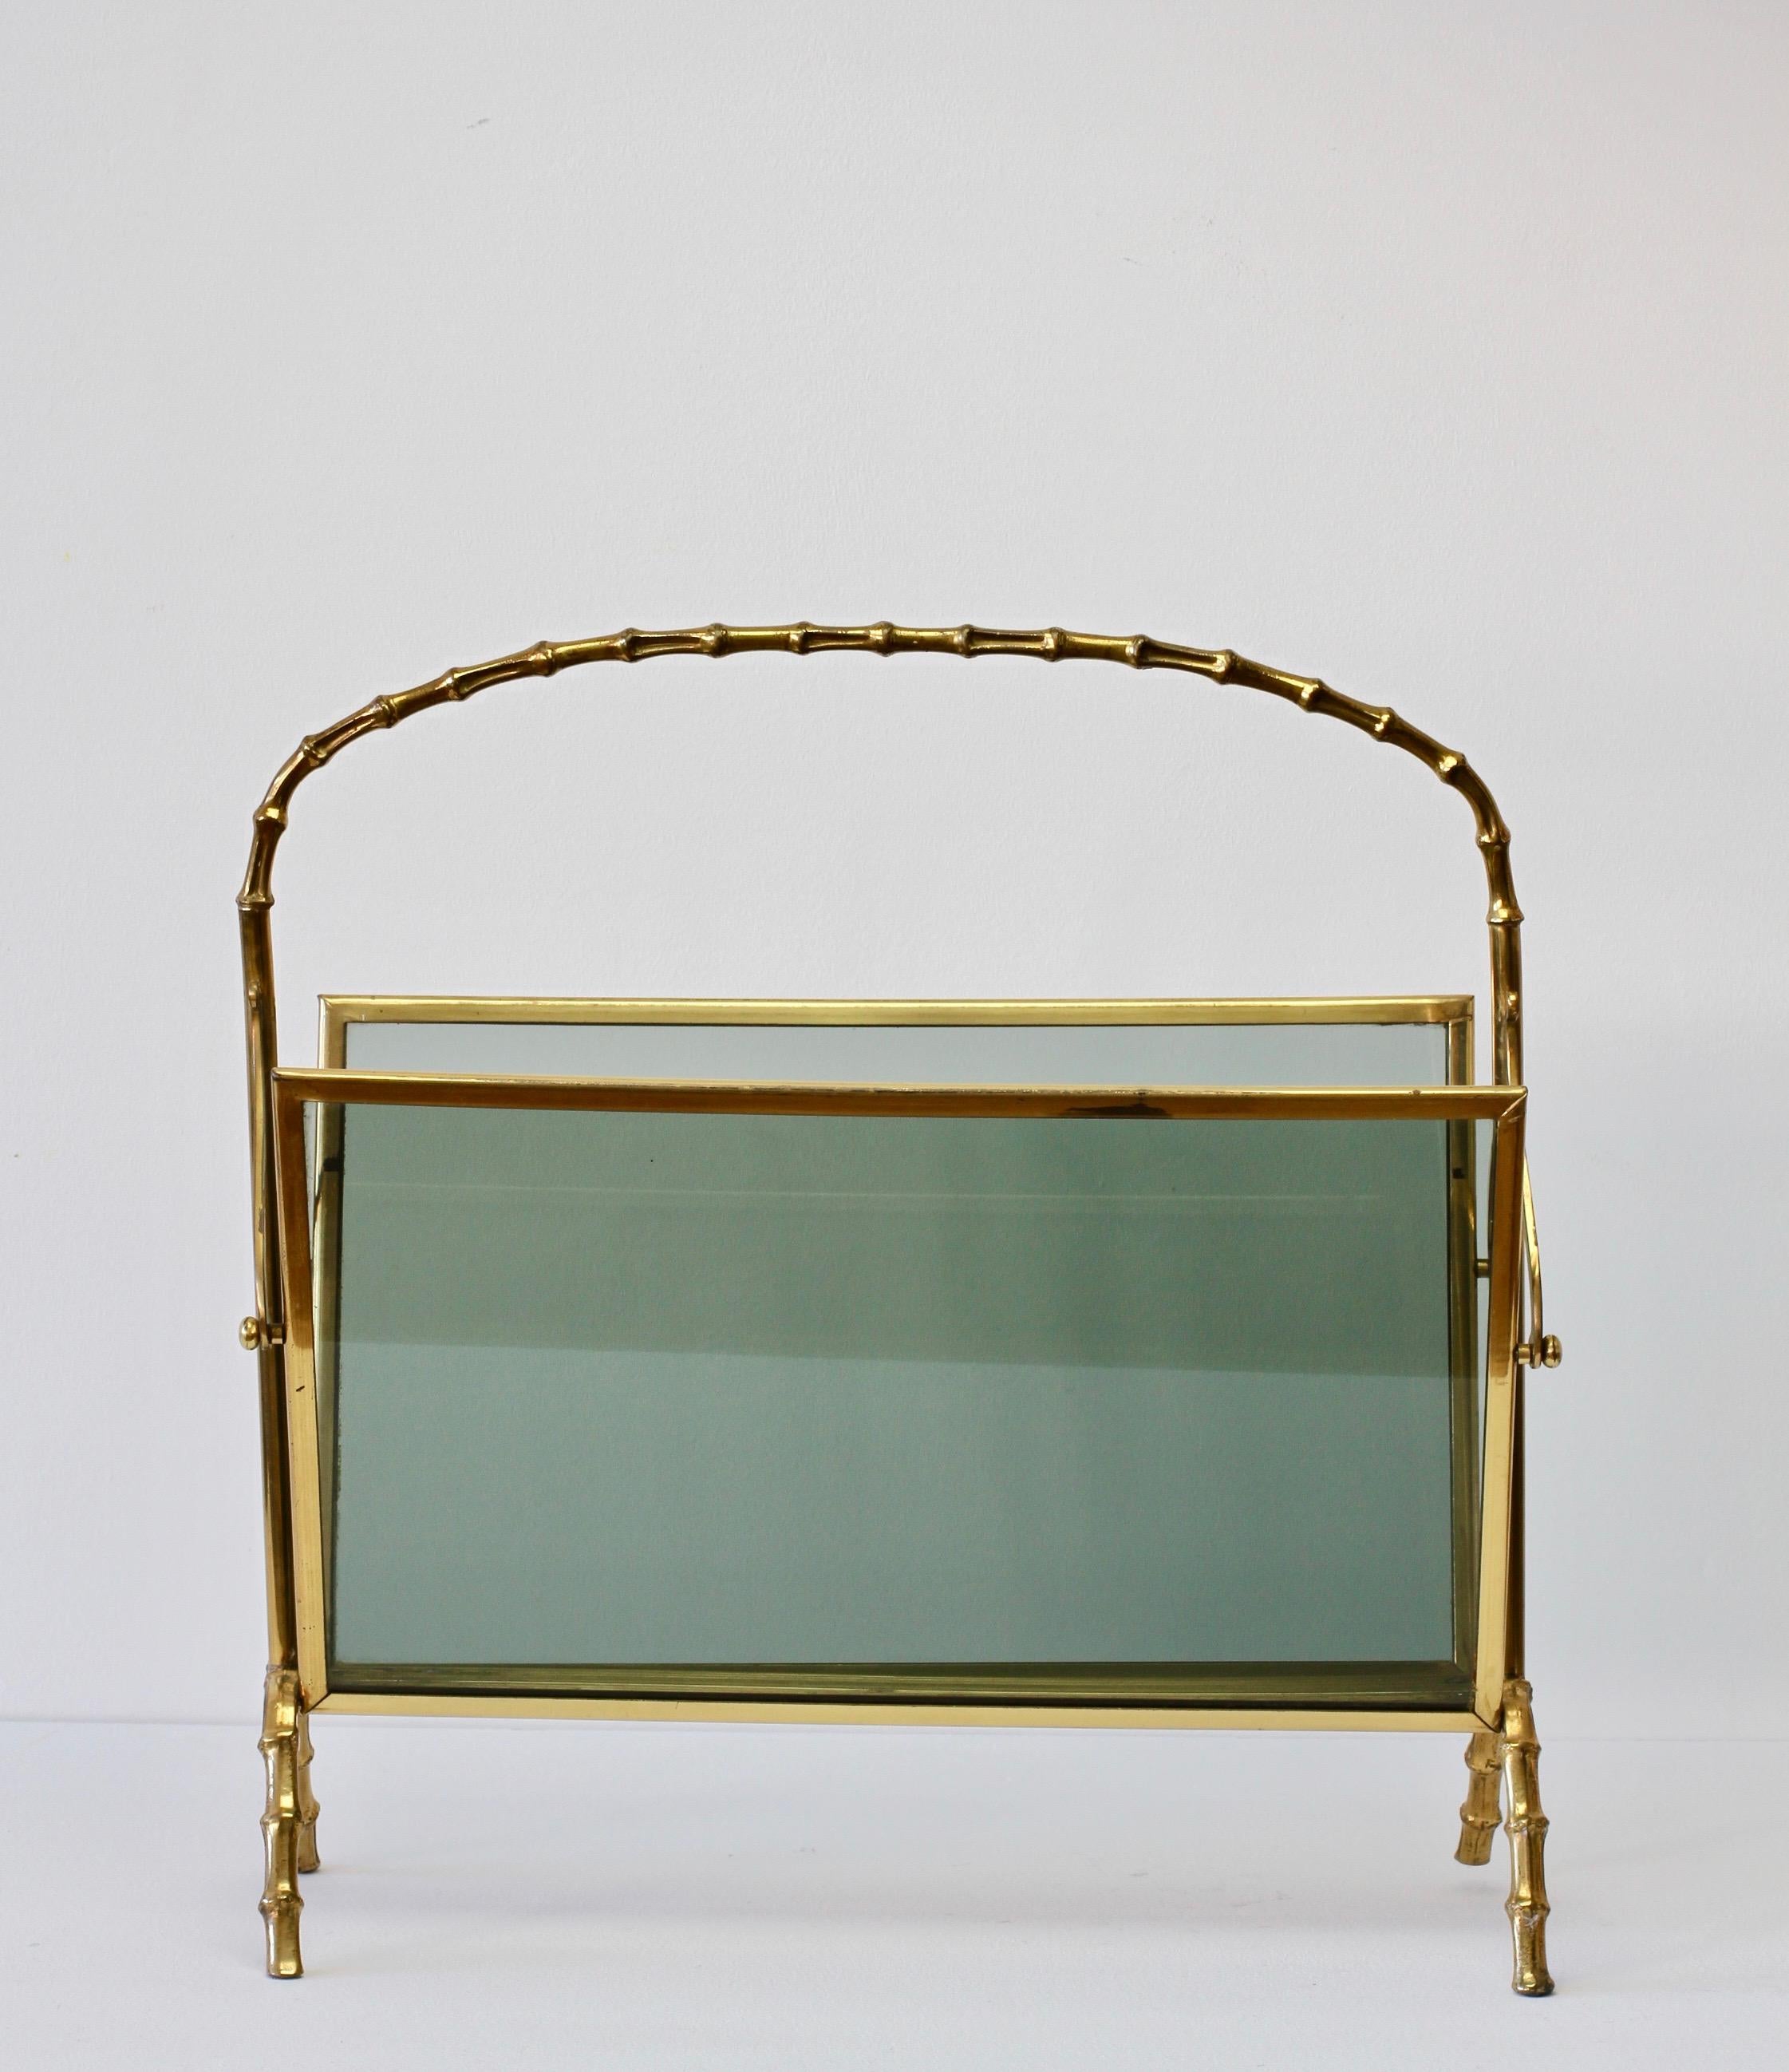 French Maison Baguès Attributed Cast Brass Faux Bamboo Magazine Rack or Newspaper Stand For Sale